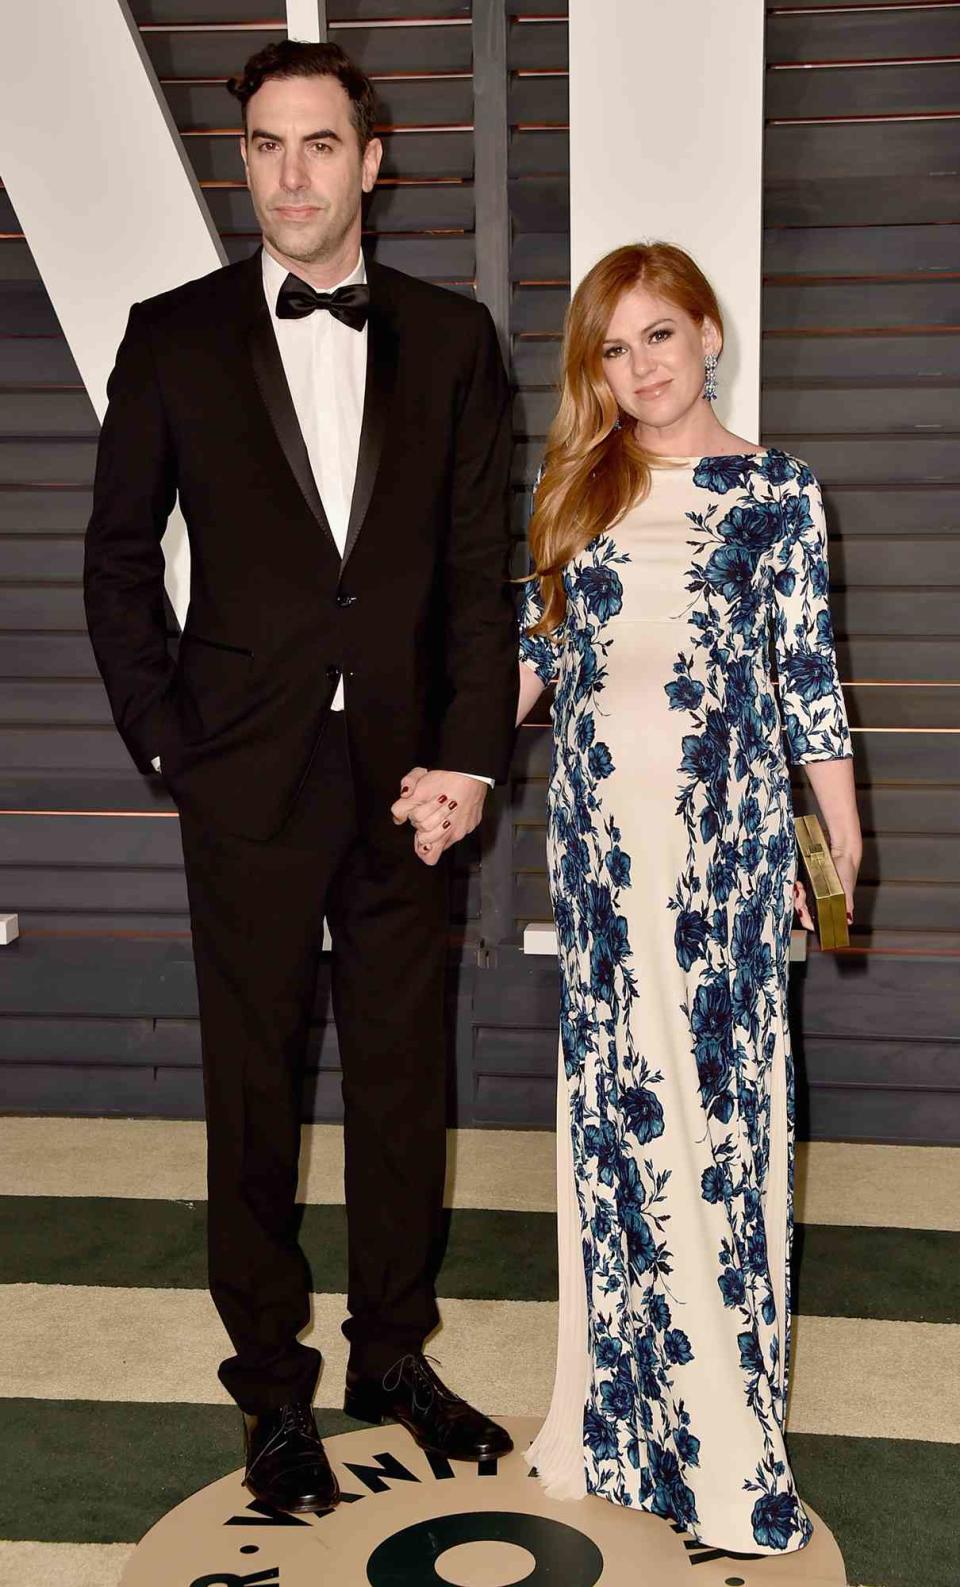 Sacha Baron Cohen (L) and Isla Fisher attend the 2015 Vanity Fair Oscar Party hosted by Graydon Carter at Wallis Annenberg Center for the Performing Arts on February 22, 2015 in Beverly Hills, California